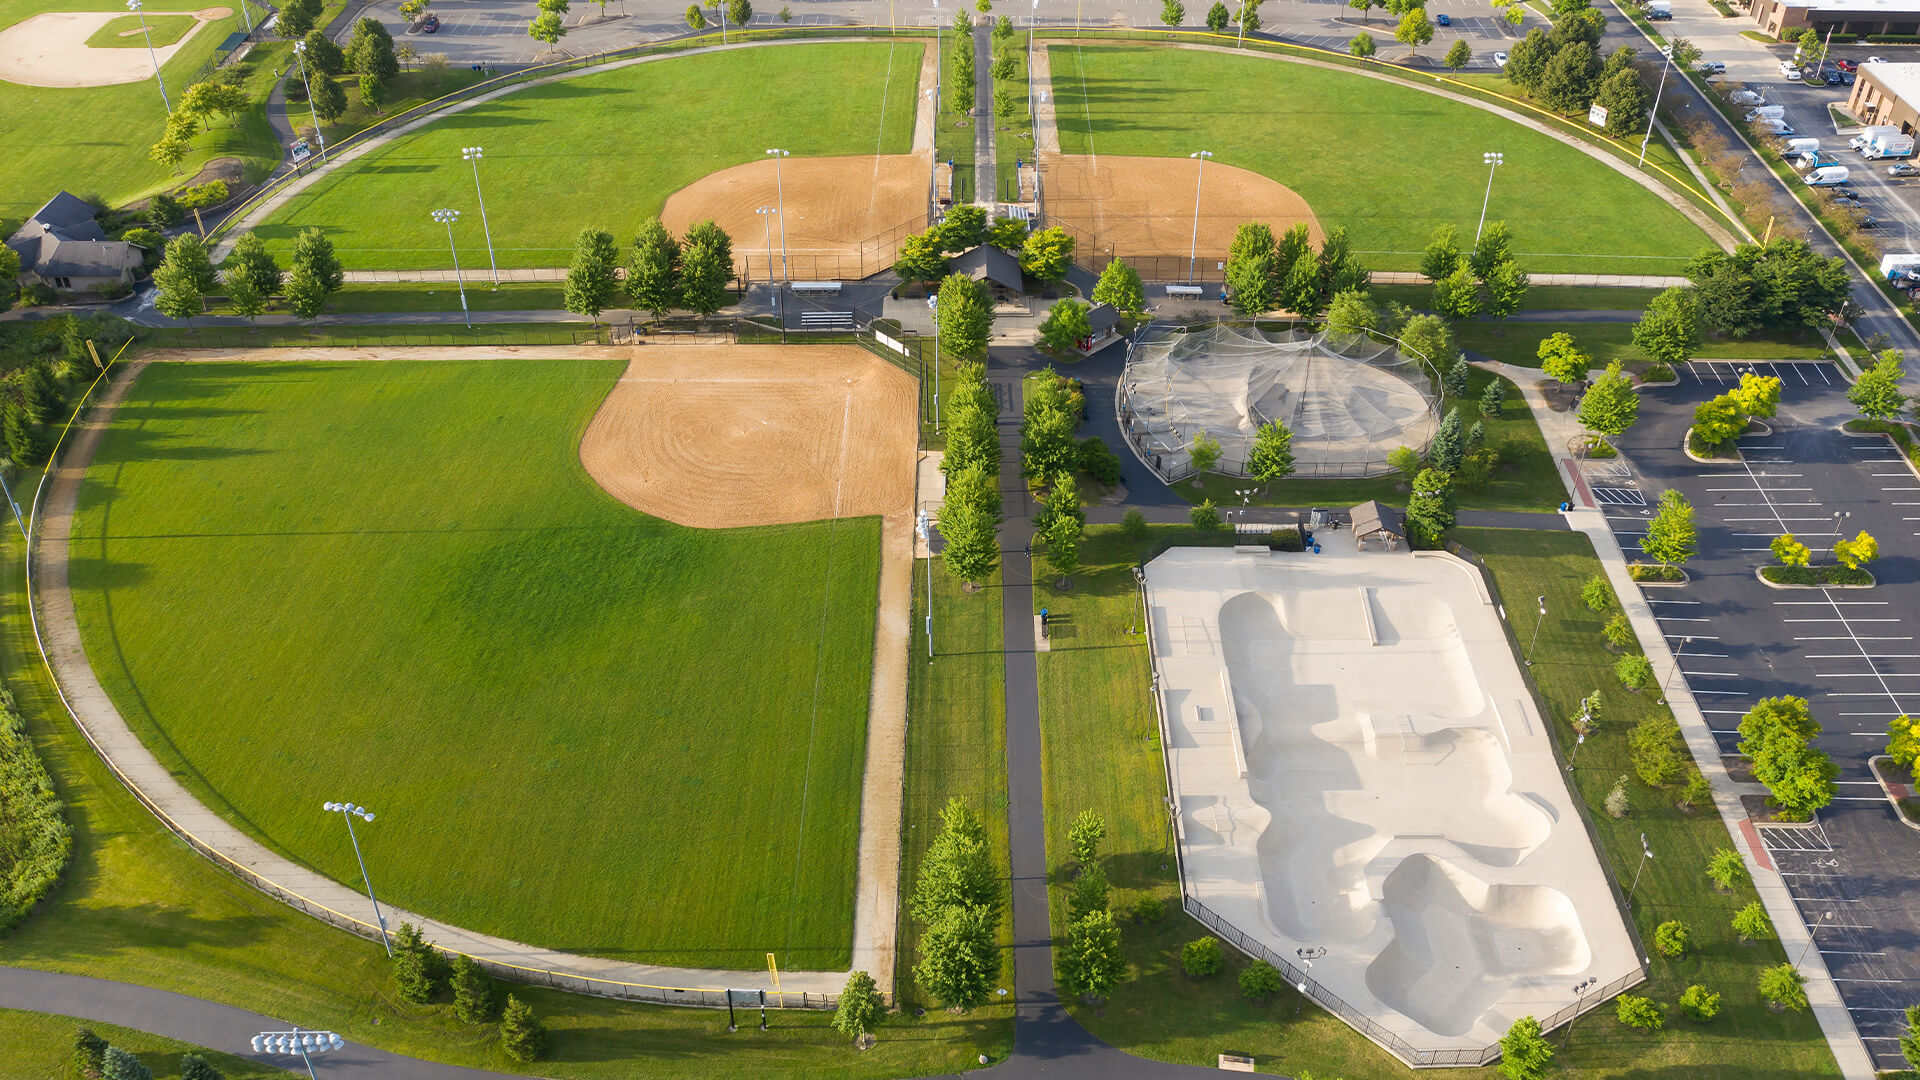 Building a Sports Complex? Here Are Things You Should Consider - BUILD  Magazine